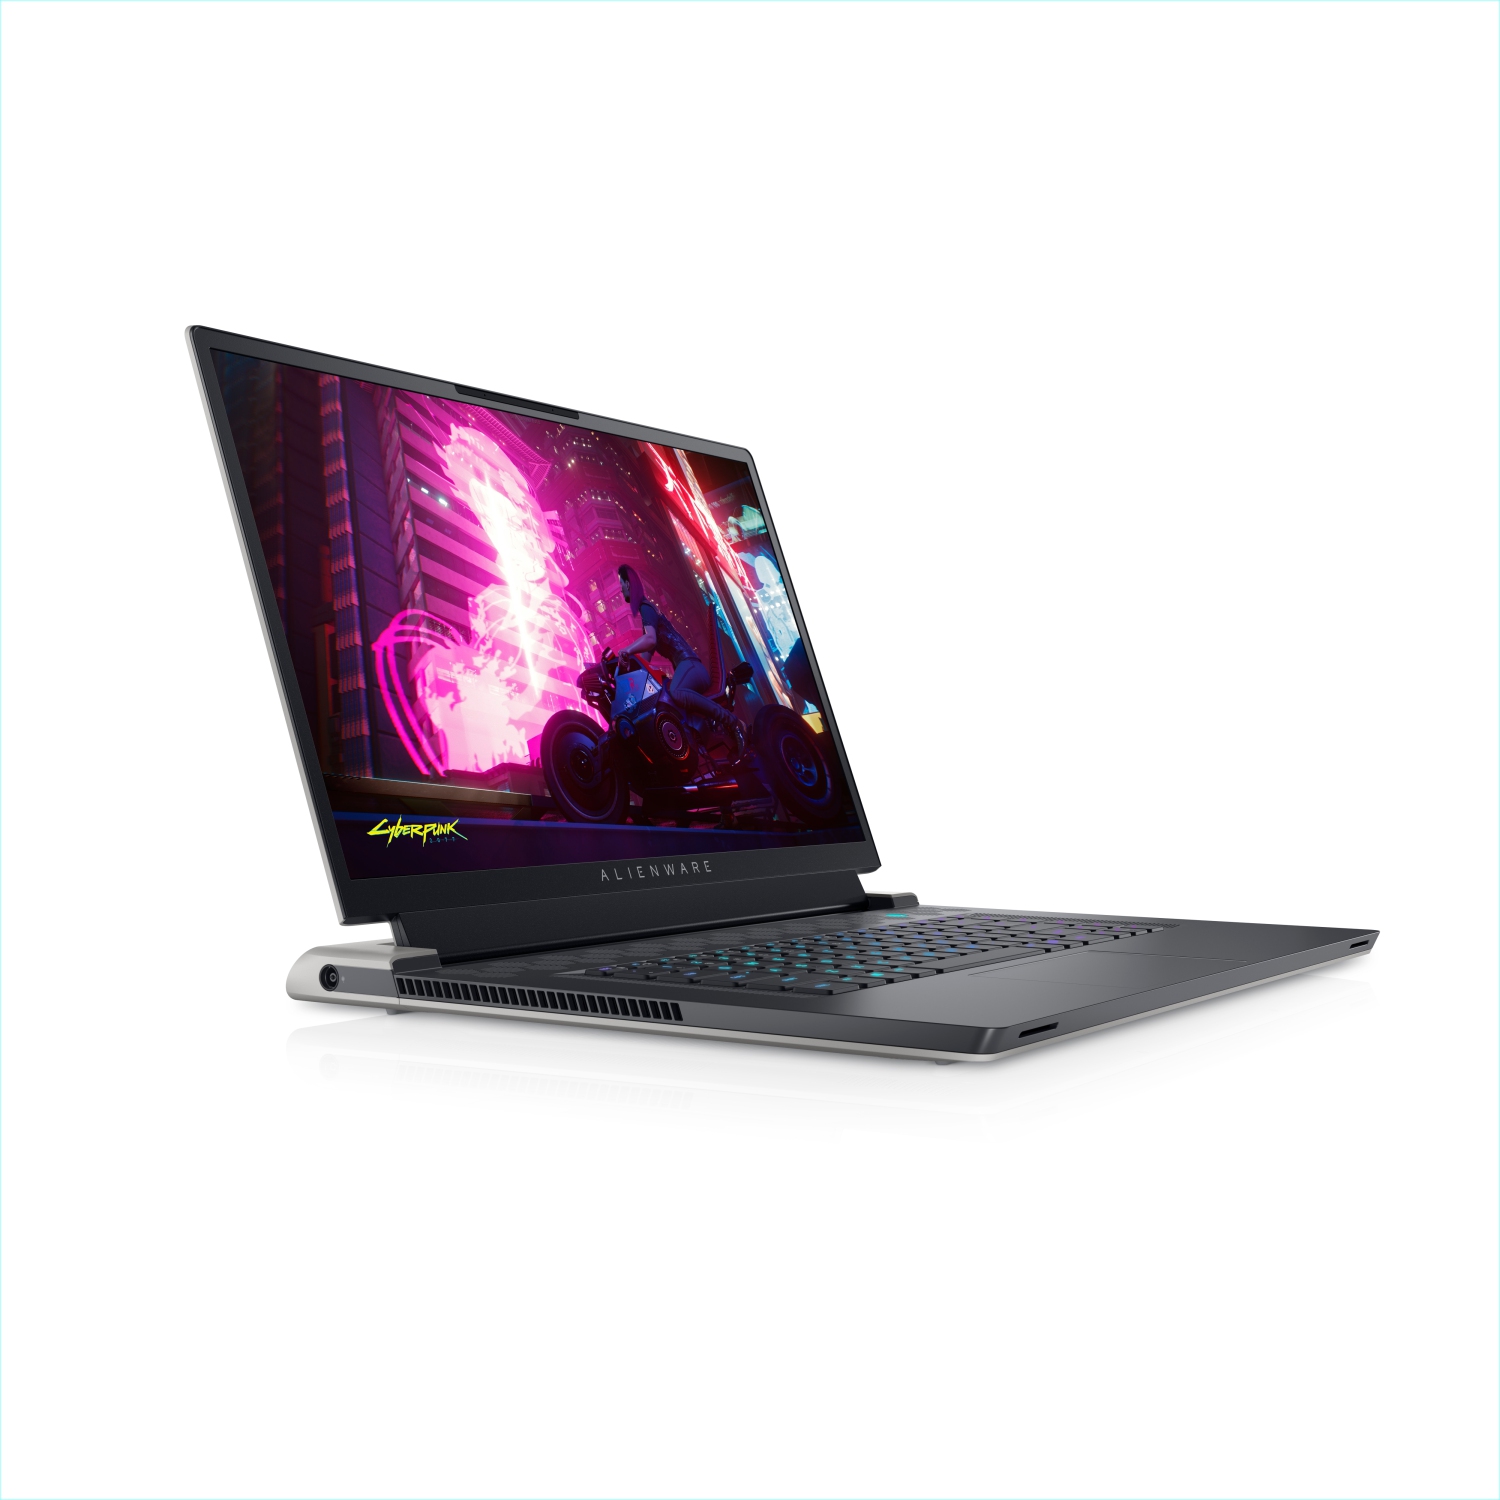 Refurbished (Excellent) - Dell Alienware X17 R1 Gaming Laptop (2021), 17.3" 4K, Core i7, 512GB SSD, 16GB RAM, RTX 3080, 8 Cores @ 4.6 GHz, 11th Gen CPU Certified